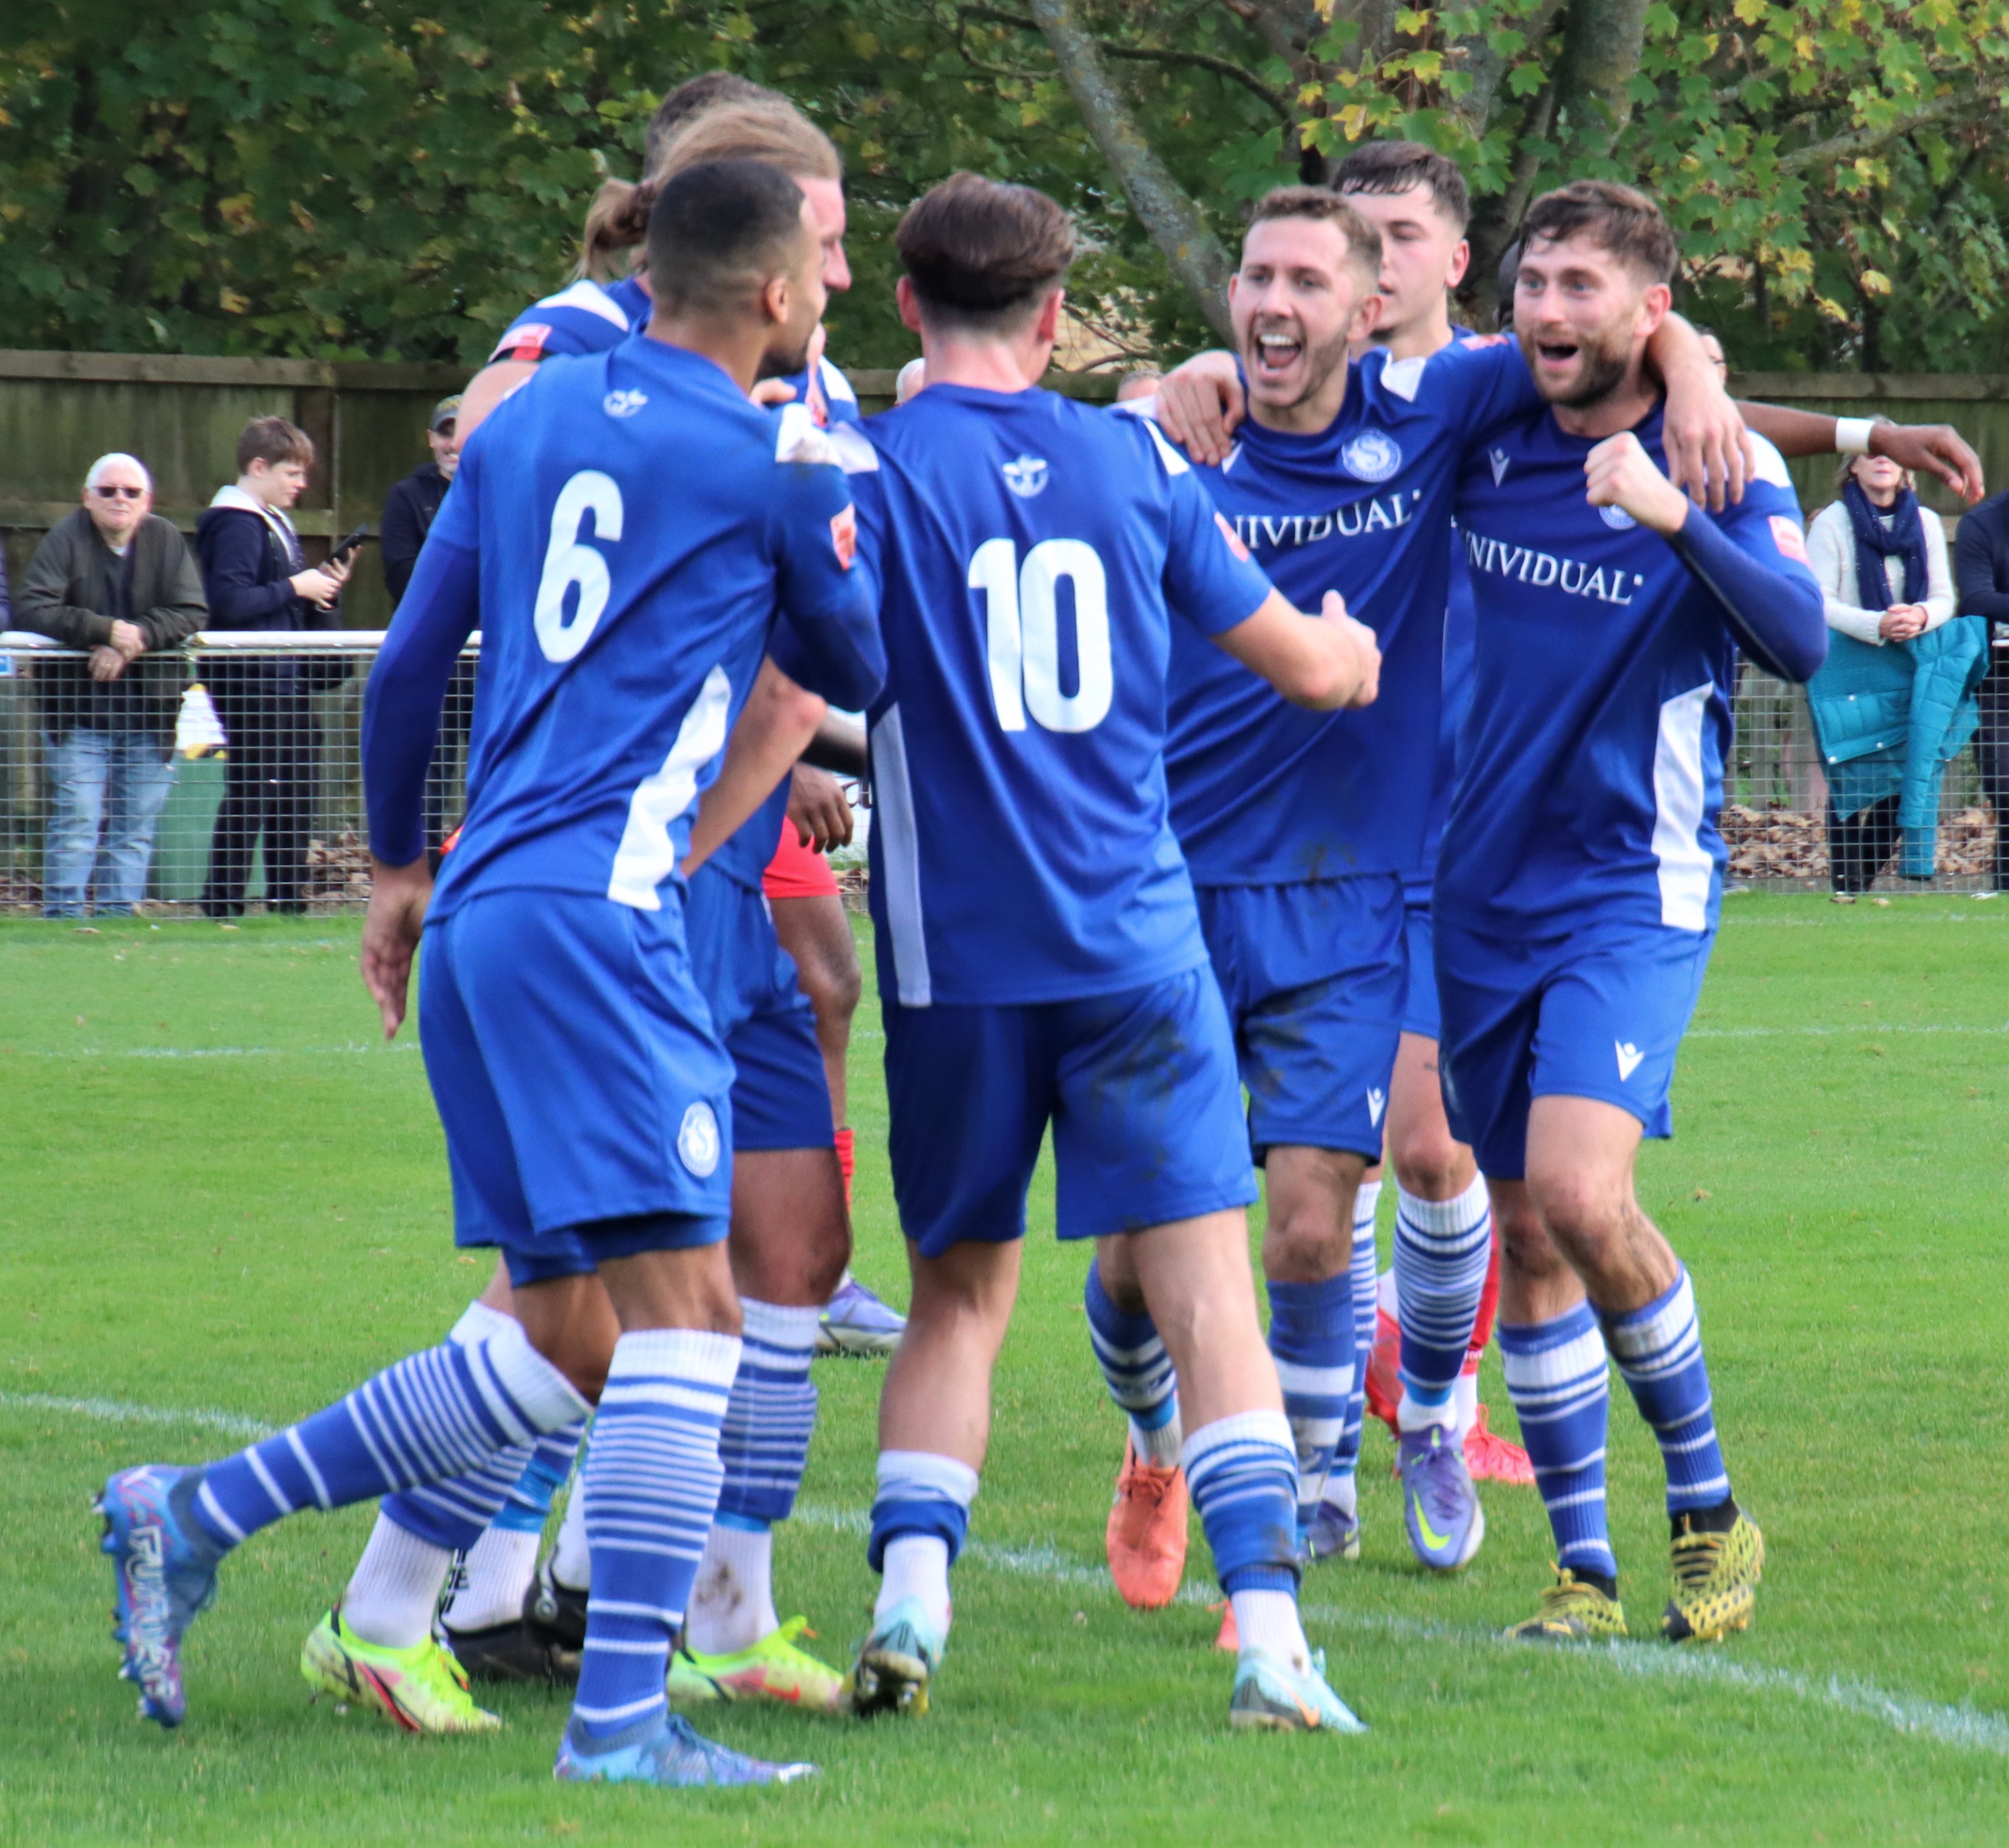 The players celebrate Conor’s goal